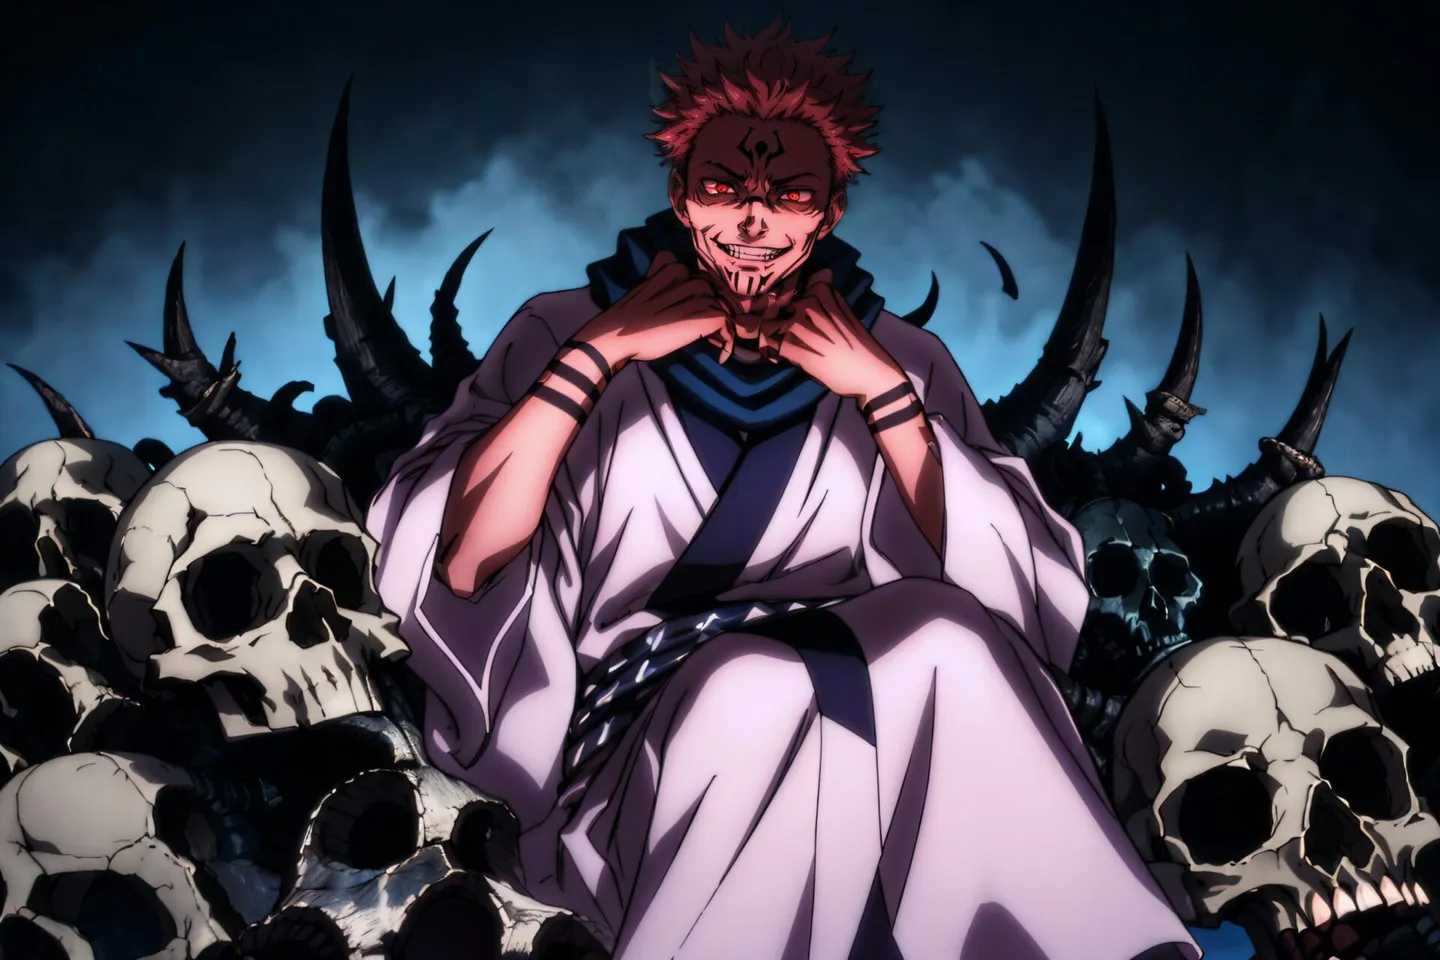 An AI-generated image using Stable Diffusion of a demonic throne with a red-haired anime character wearing white robes, seated amidst skulls with a dark background.